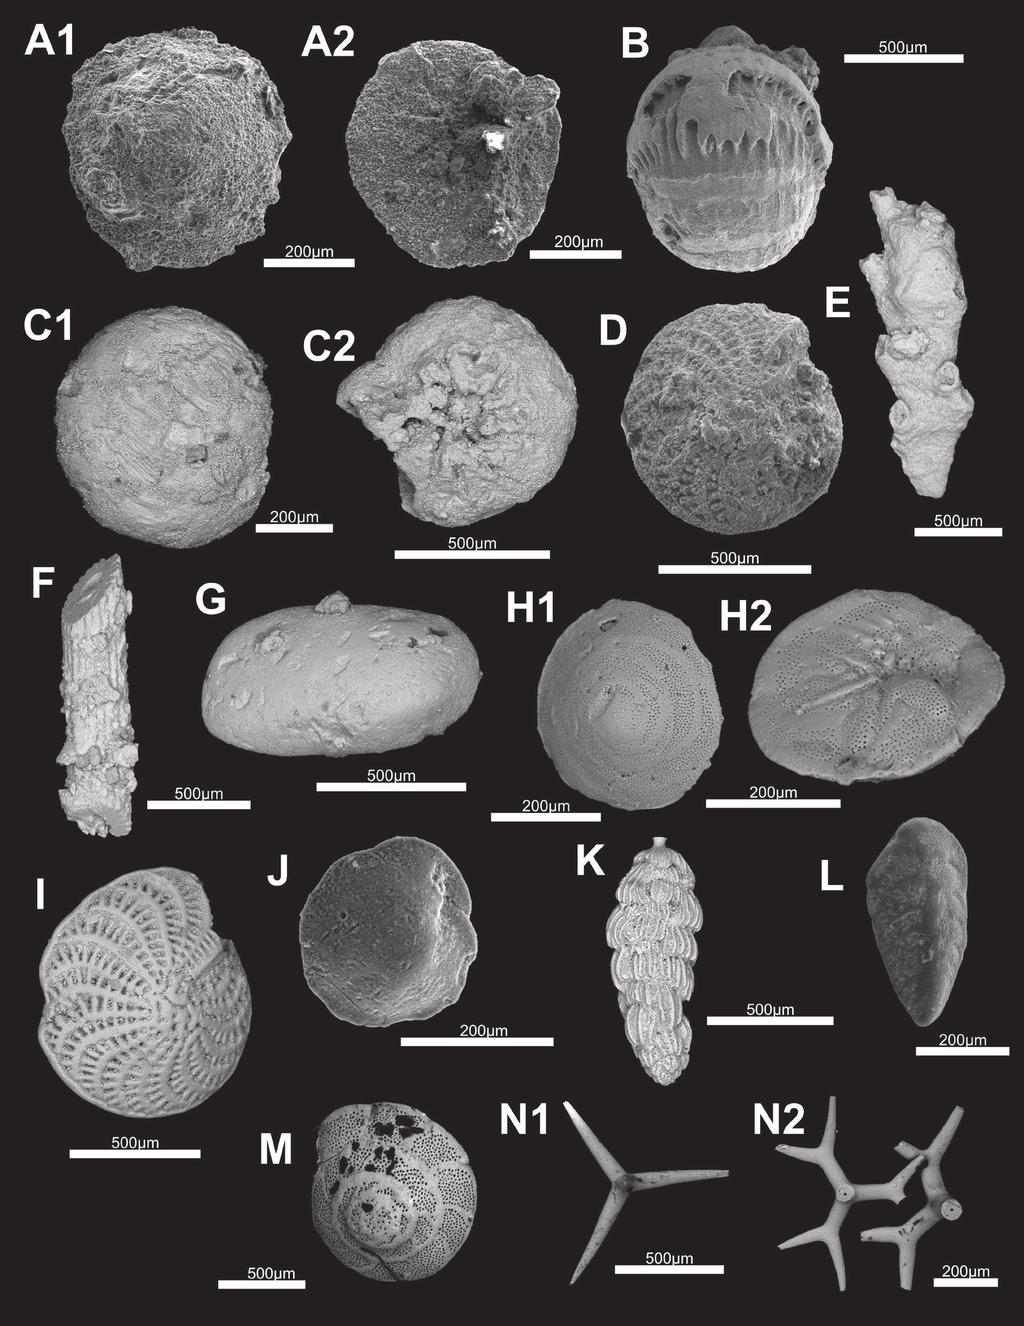 ML MCN SHALLW-WATR BNTHC FRAMNFRS, MVNCA MT. (CRATA) Fig.. Typical microfossils from Borovnjak (A-G) and Gornje Vrap e section (H-N).